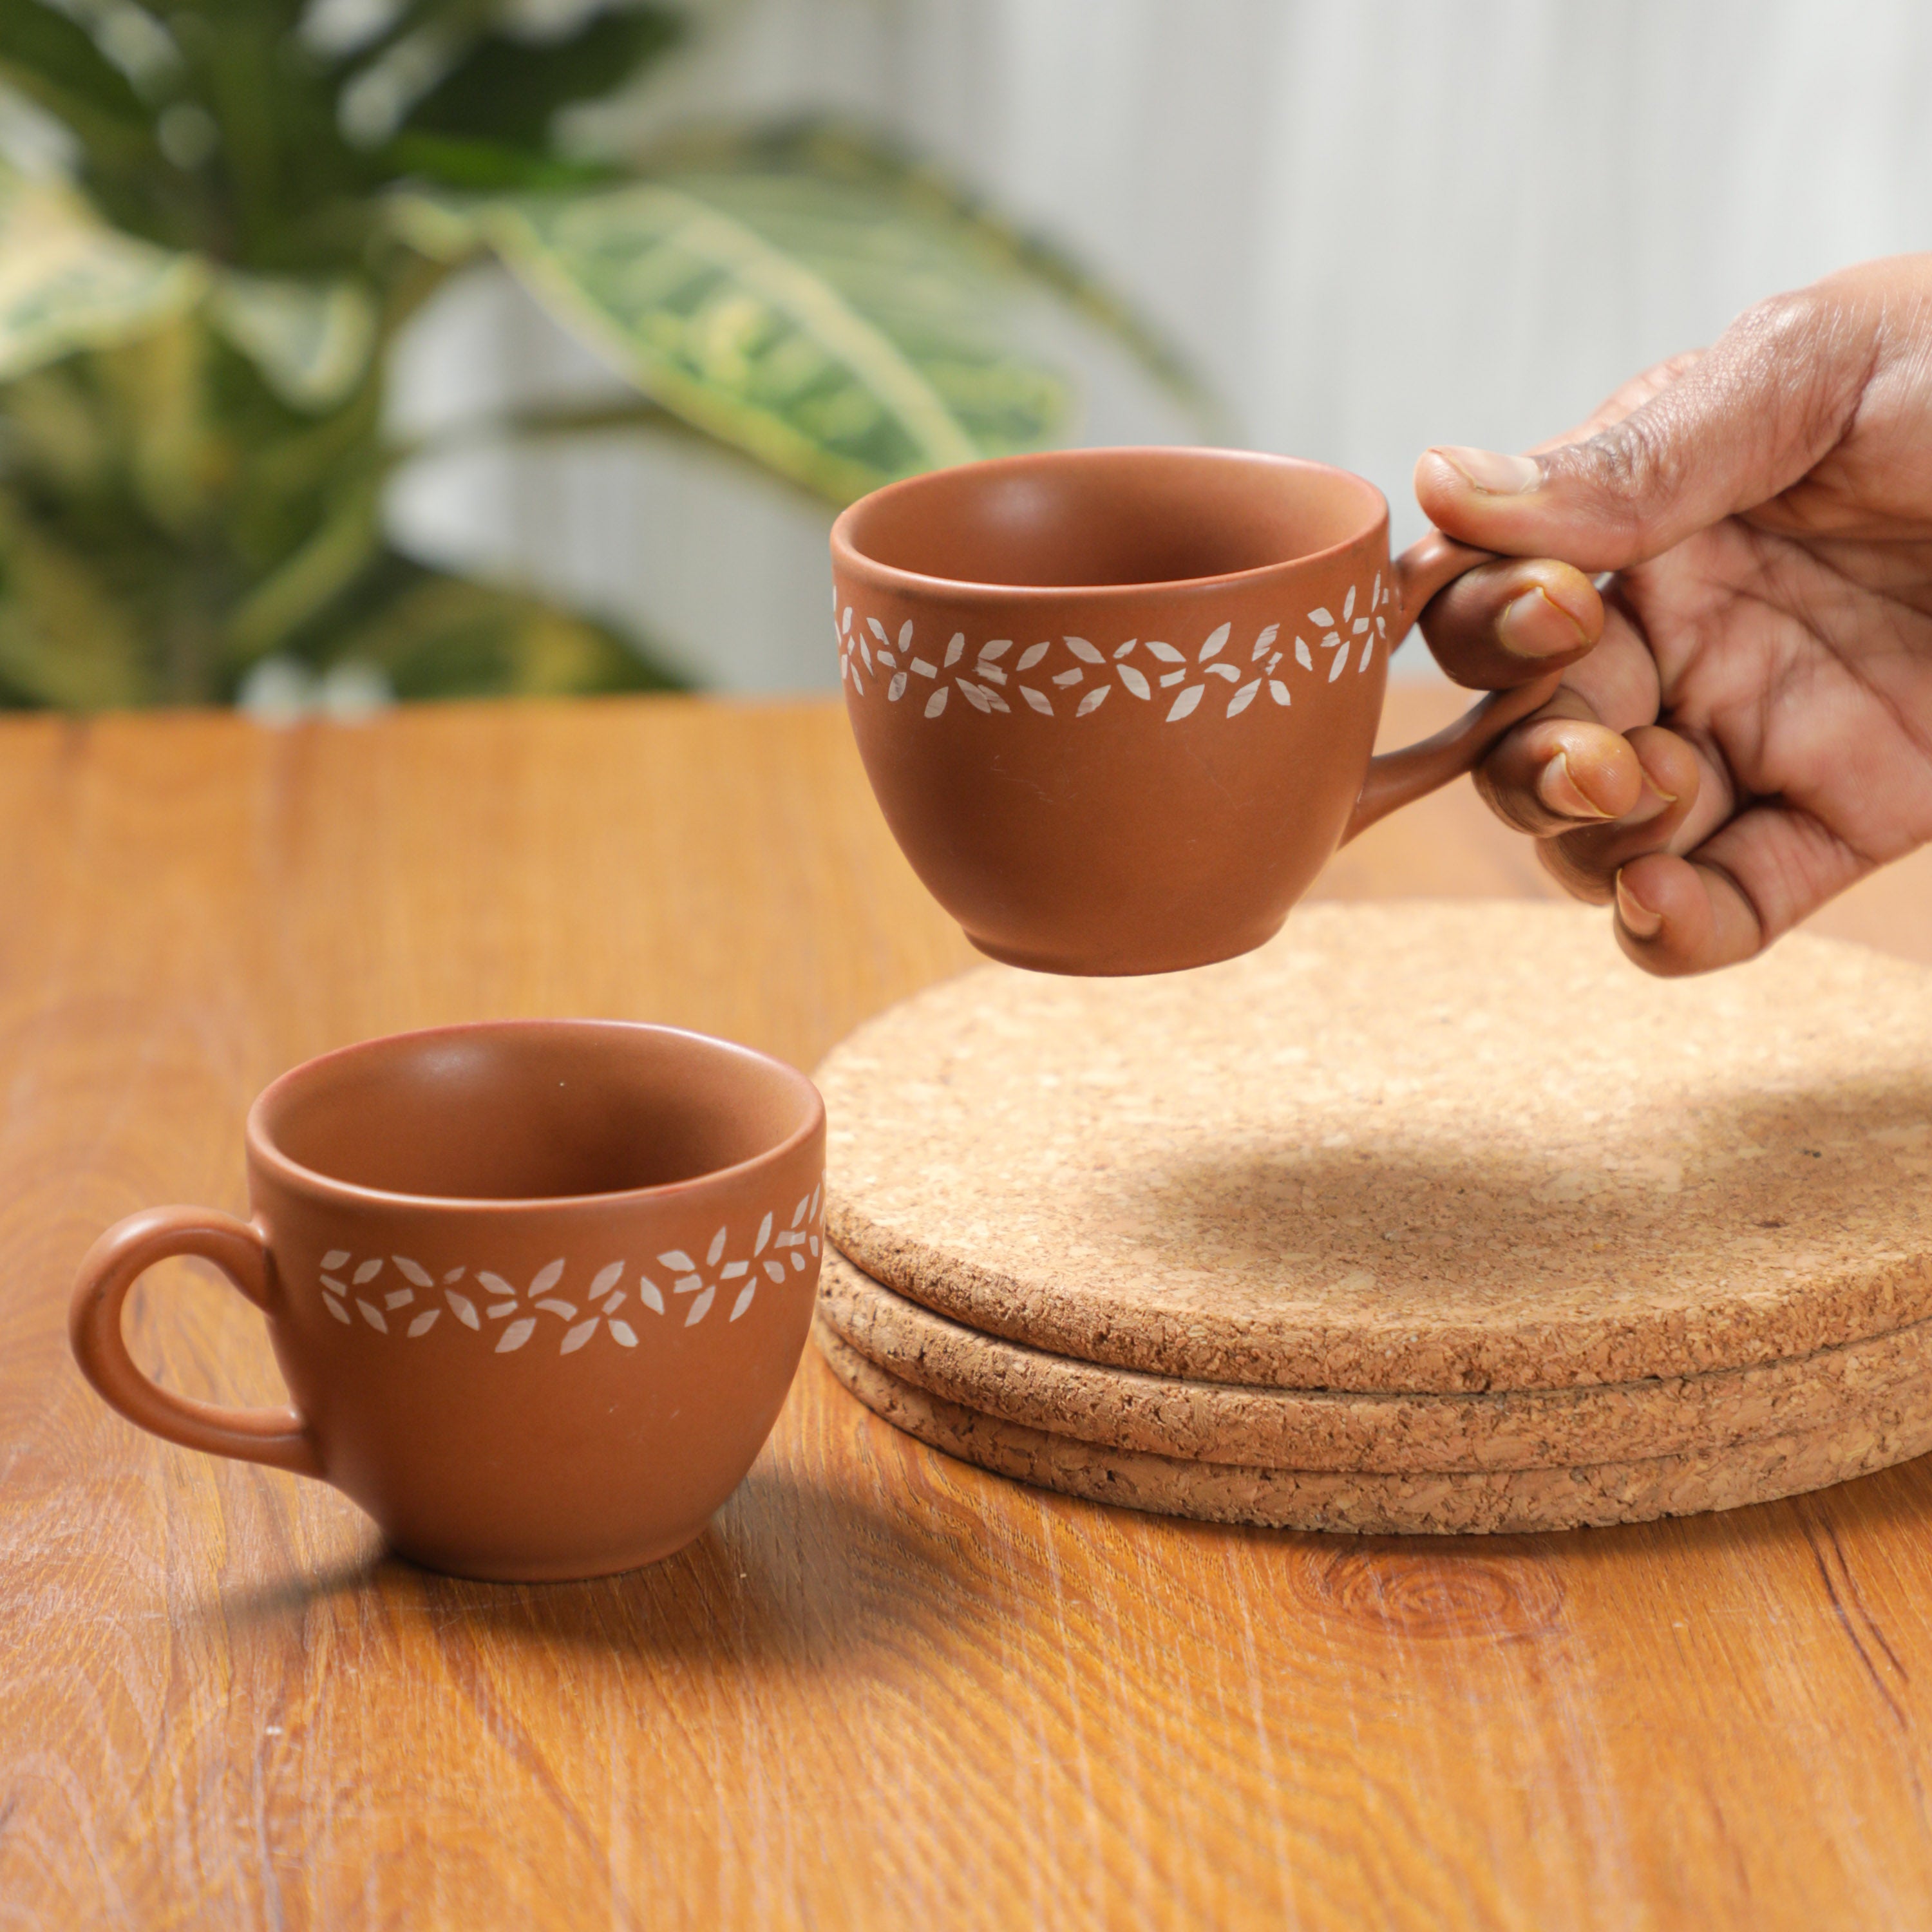 Enjoy your tea in style with these beautifully crafted Floral Ceramic Tea Cups